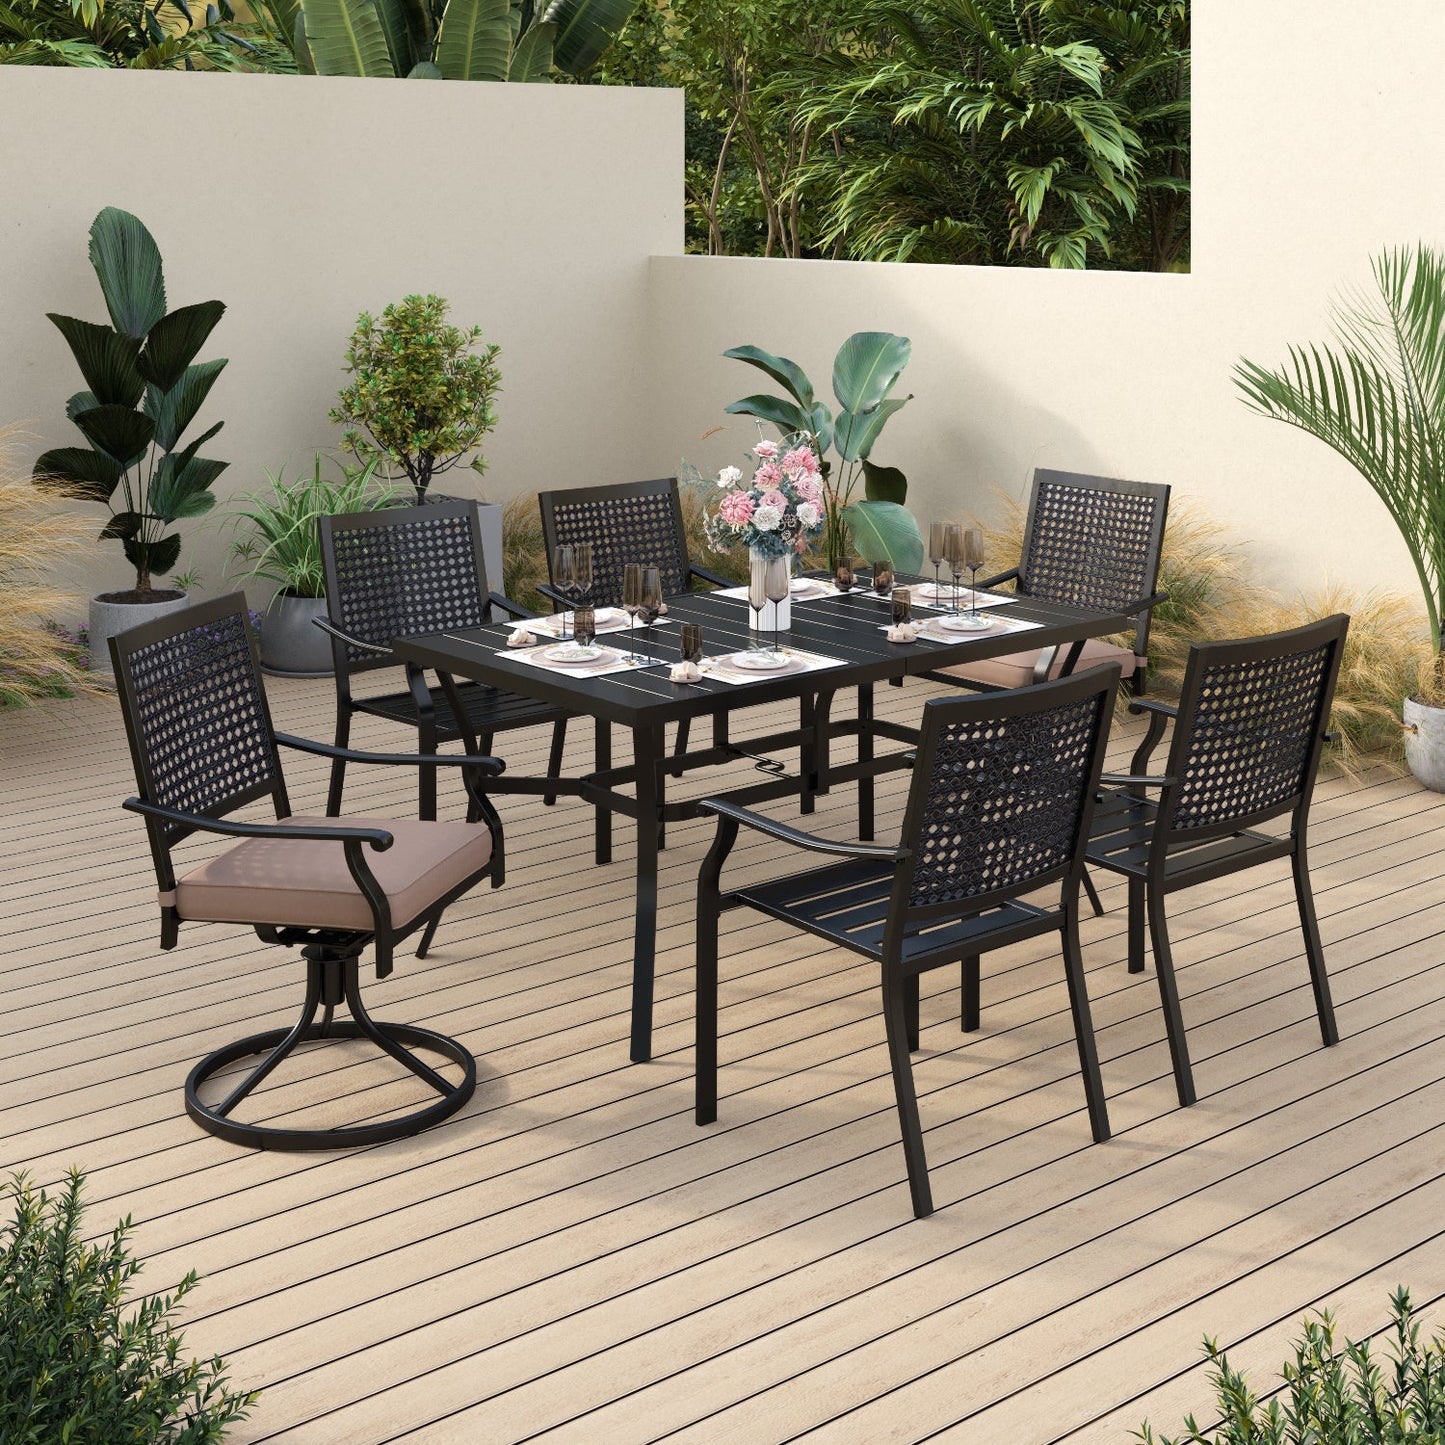 Sophia & William 7 Piece Patio Dining Set with 6 Piece Dining Chairs and 1 Piece Rectangular Dining Wood Table